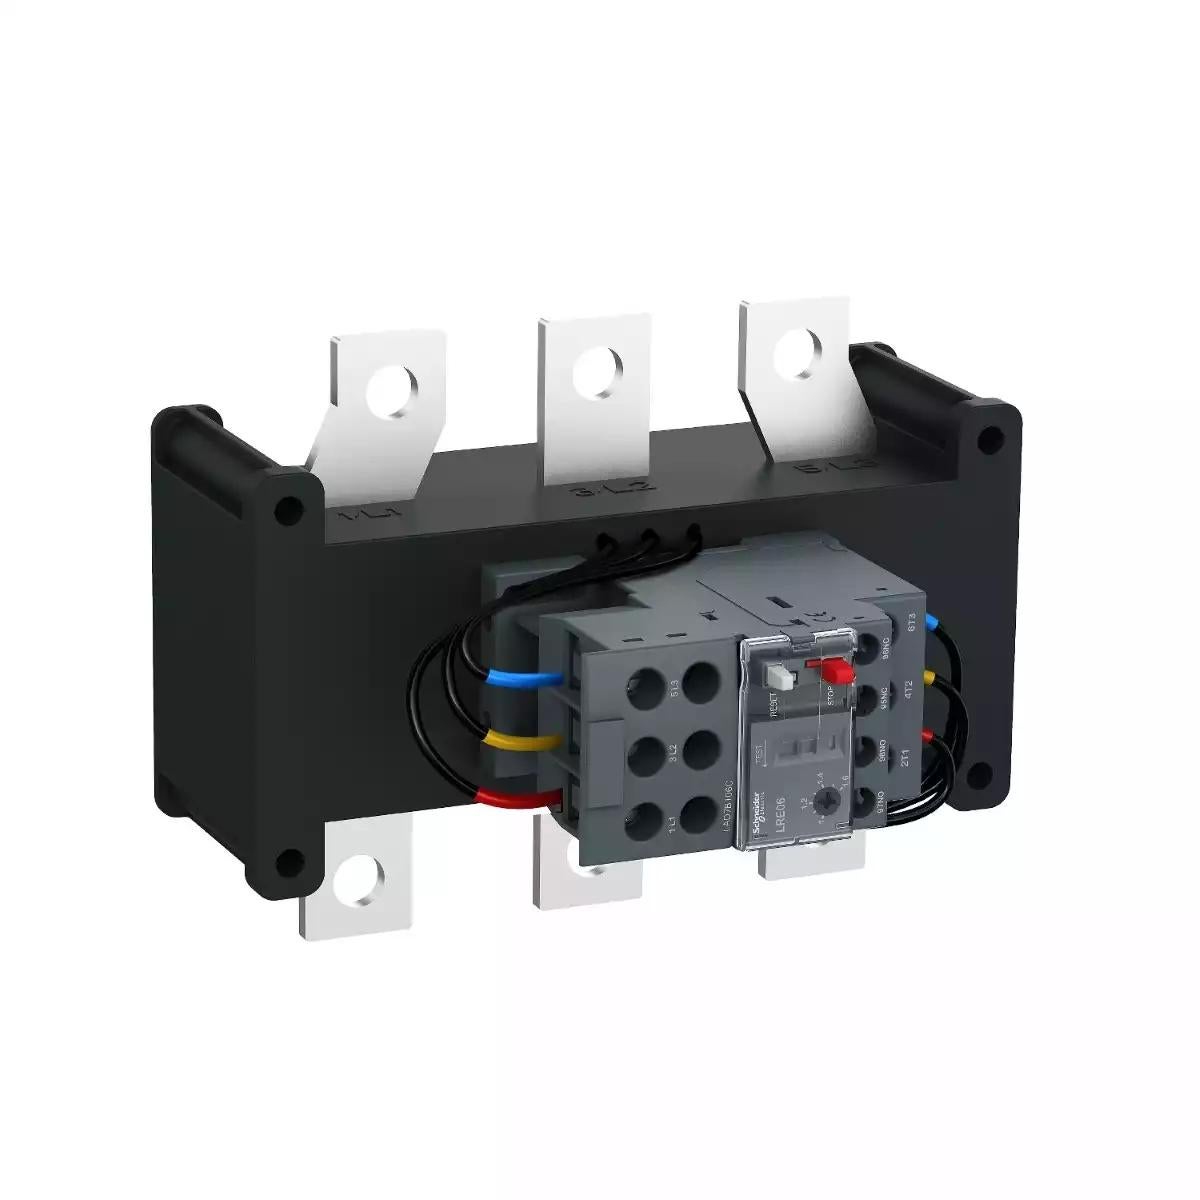 THERMAL OVERLOAD RELAY EasyPact TVS